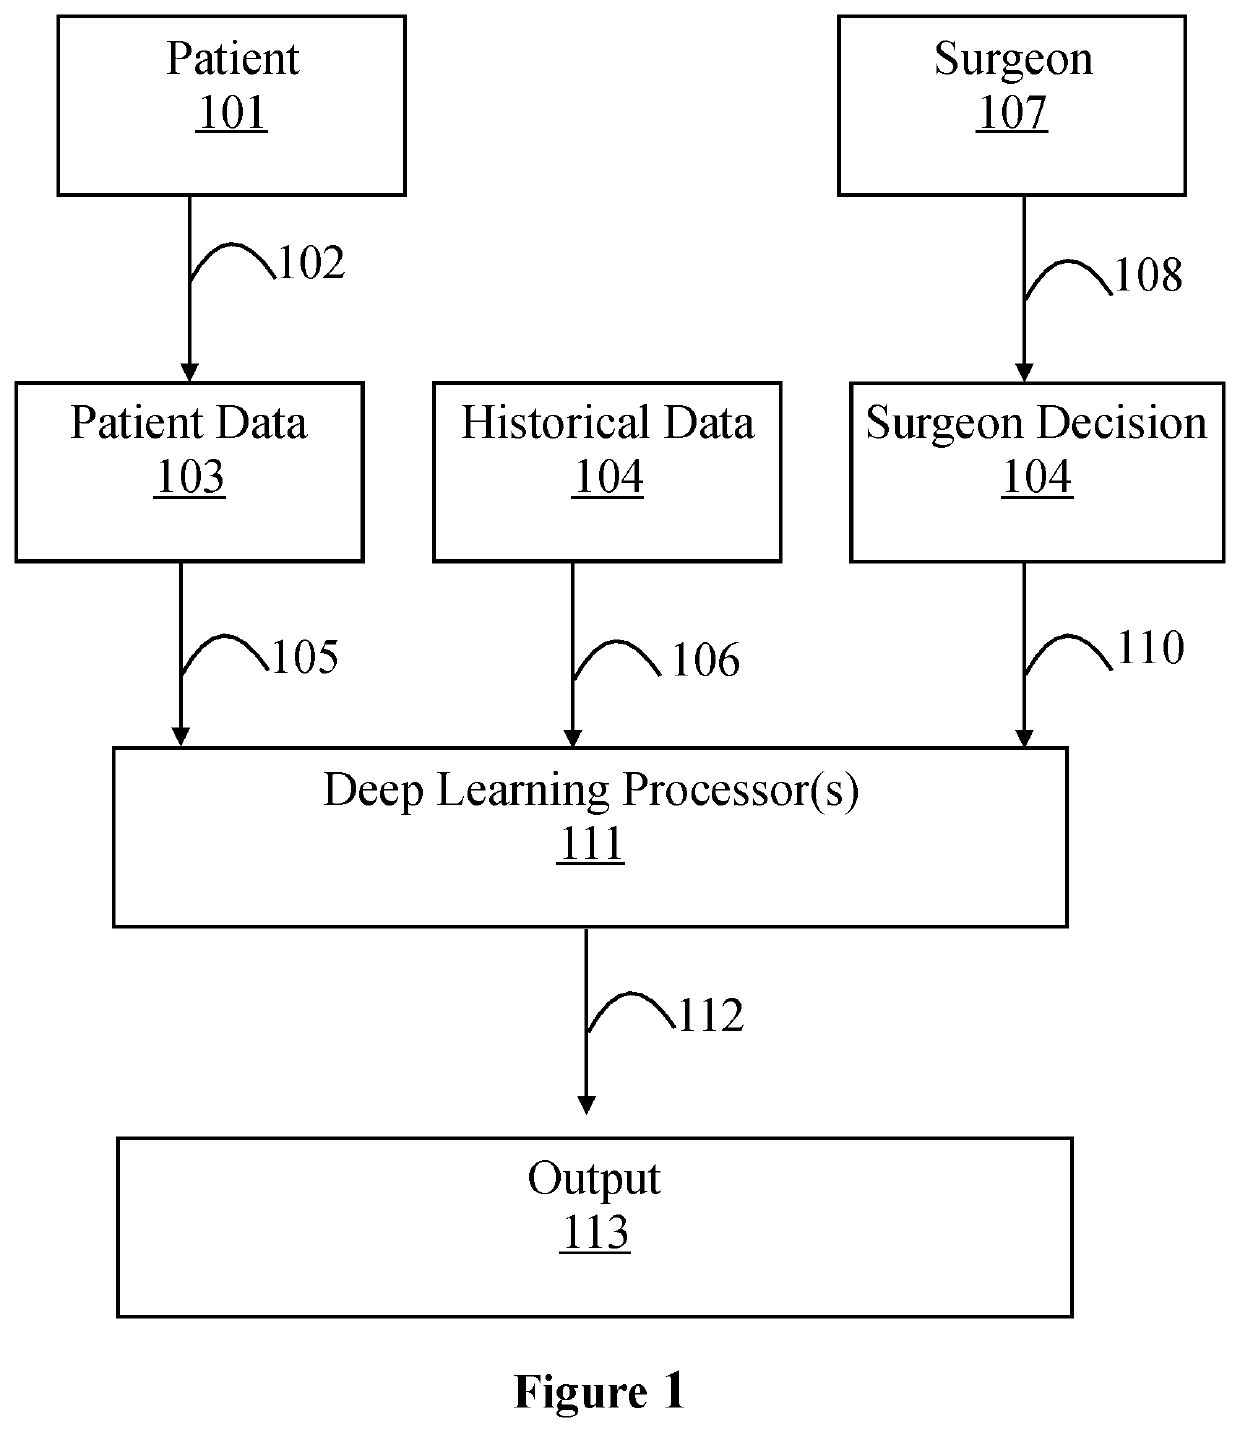 System for Surgical Decisions Using Deep Learning